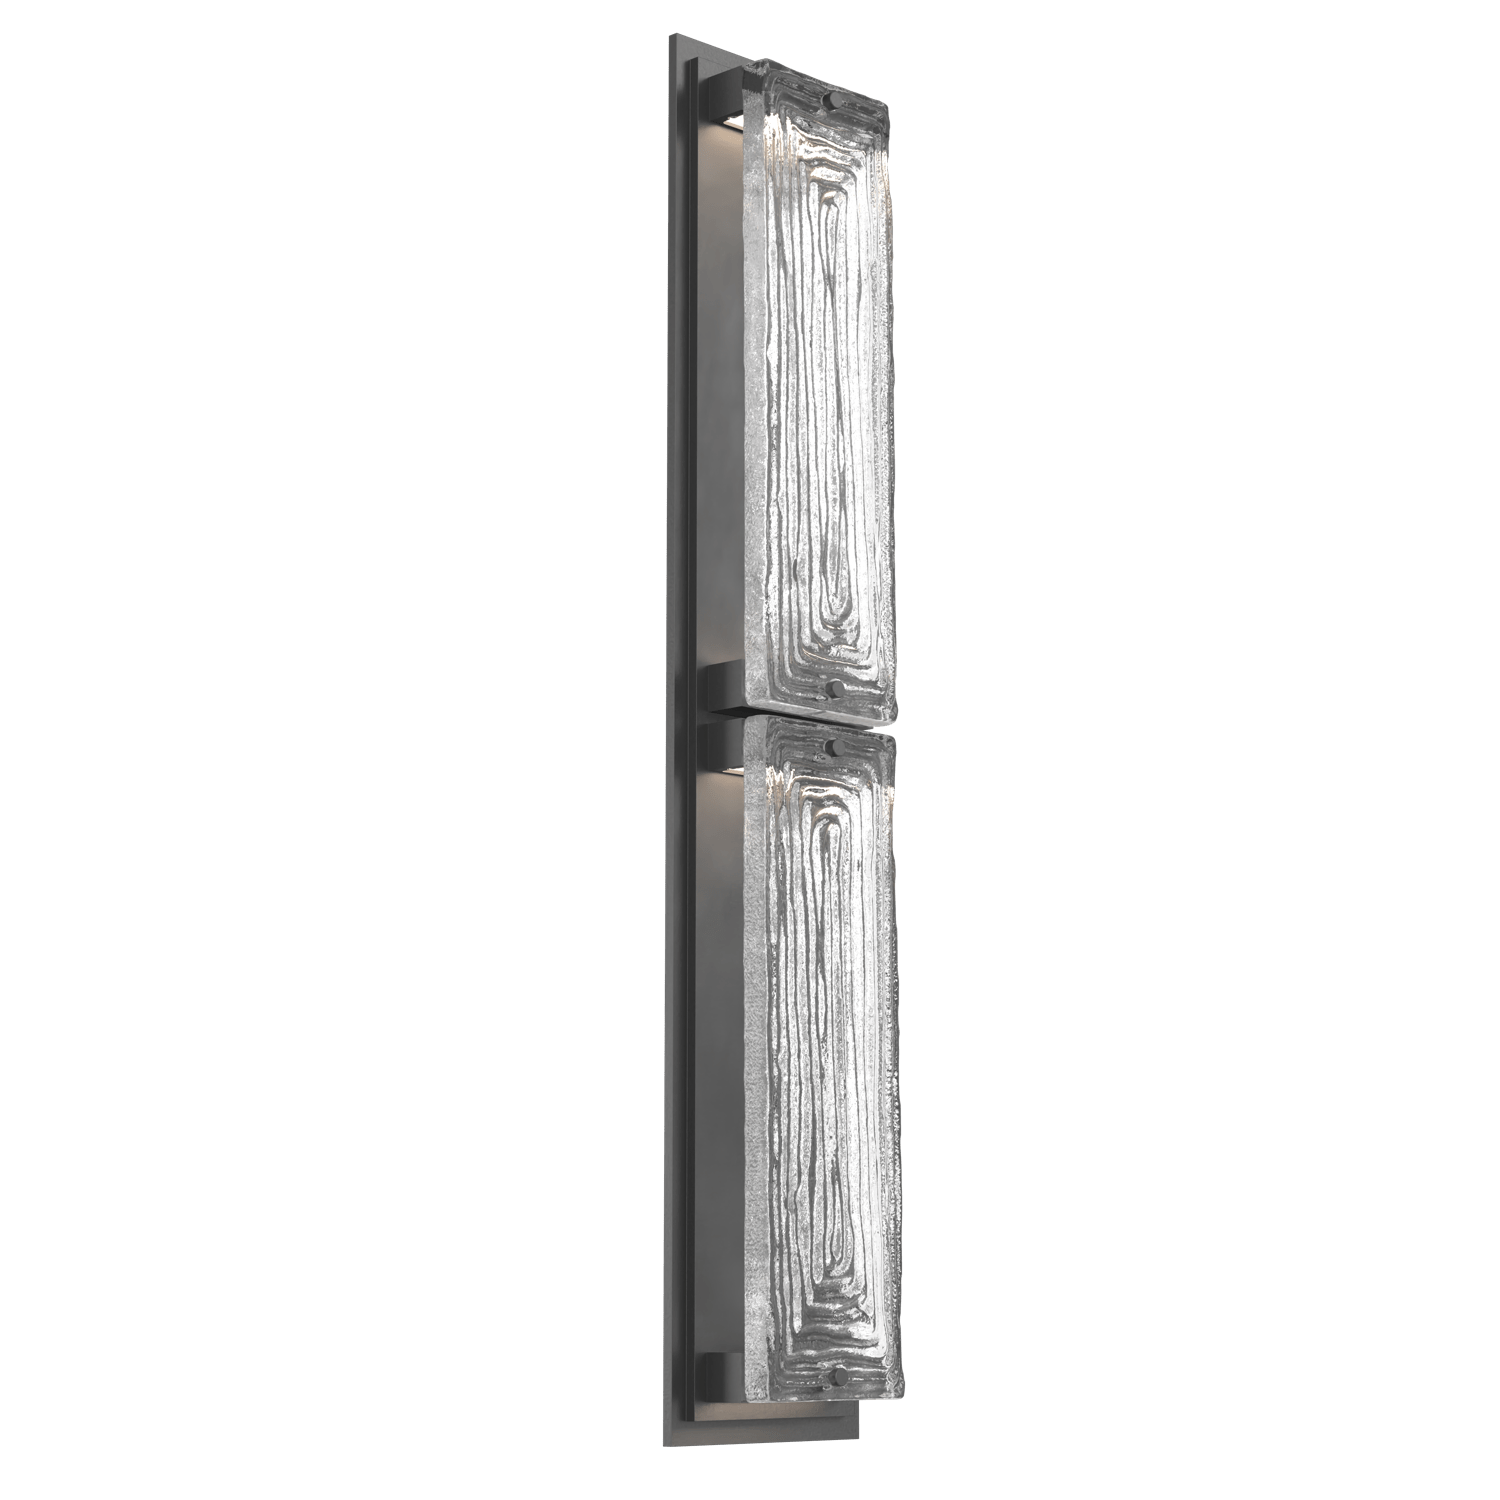 ODB0090-02-AG-TL-Hammerton-Studio-Tabulo-28-inch-outdoor-sconce-with-argento-grey-finish-and-clear-linea-cast-glass-shade-and-LED-lamping